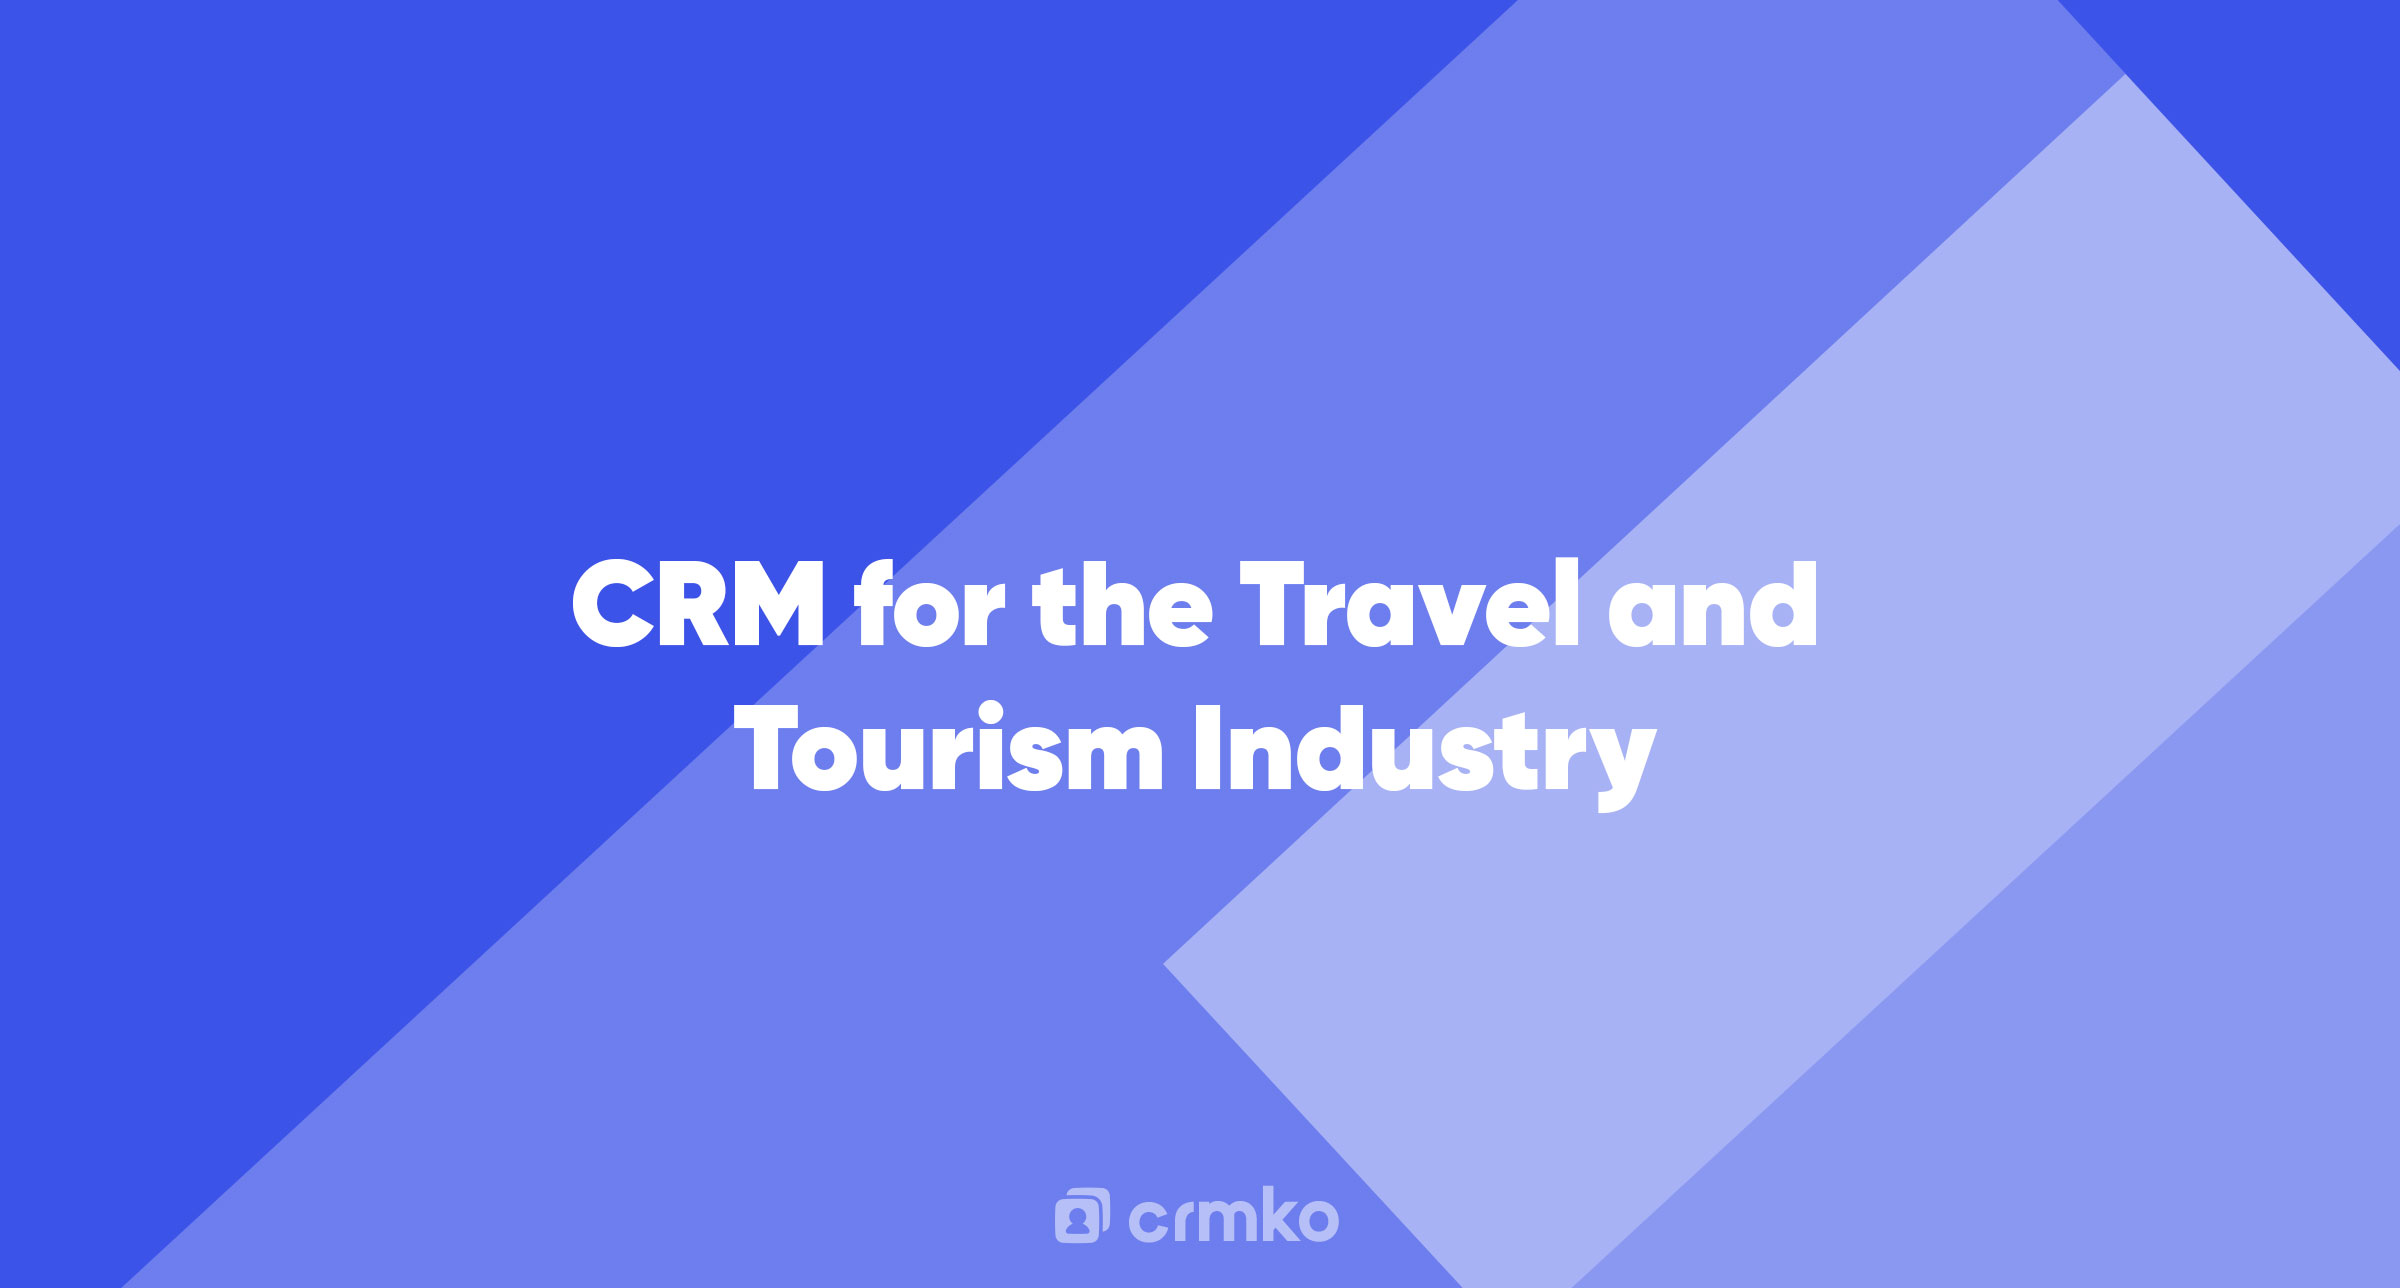 Article | CRM for the Travel and Tourism Industry